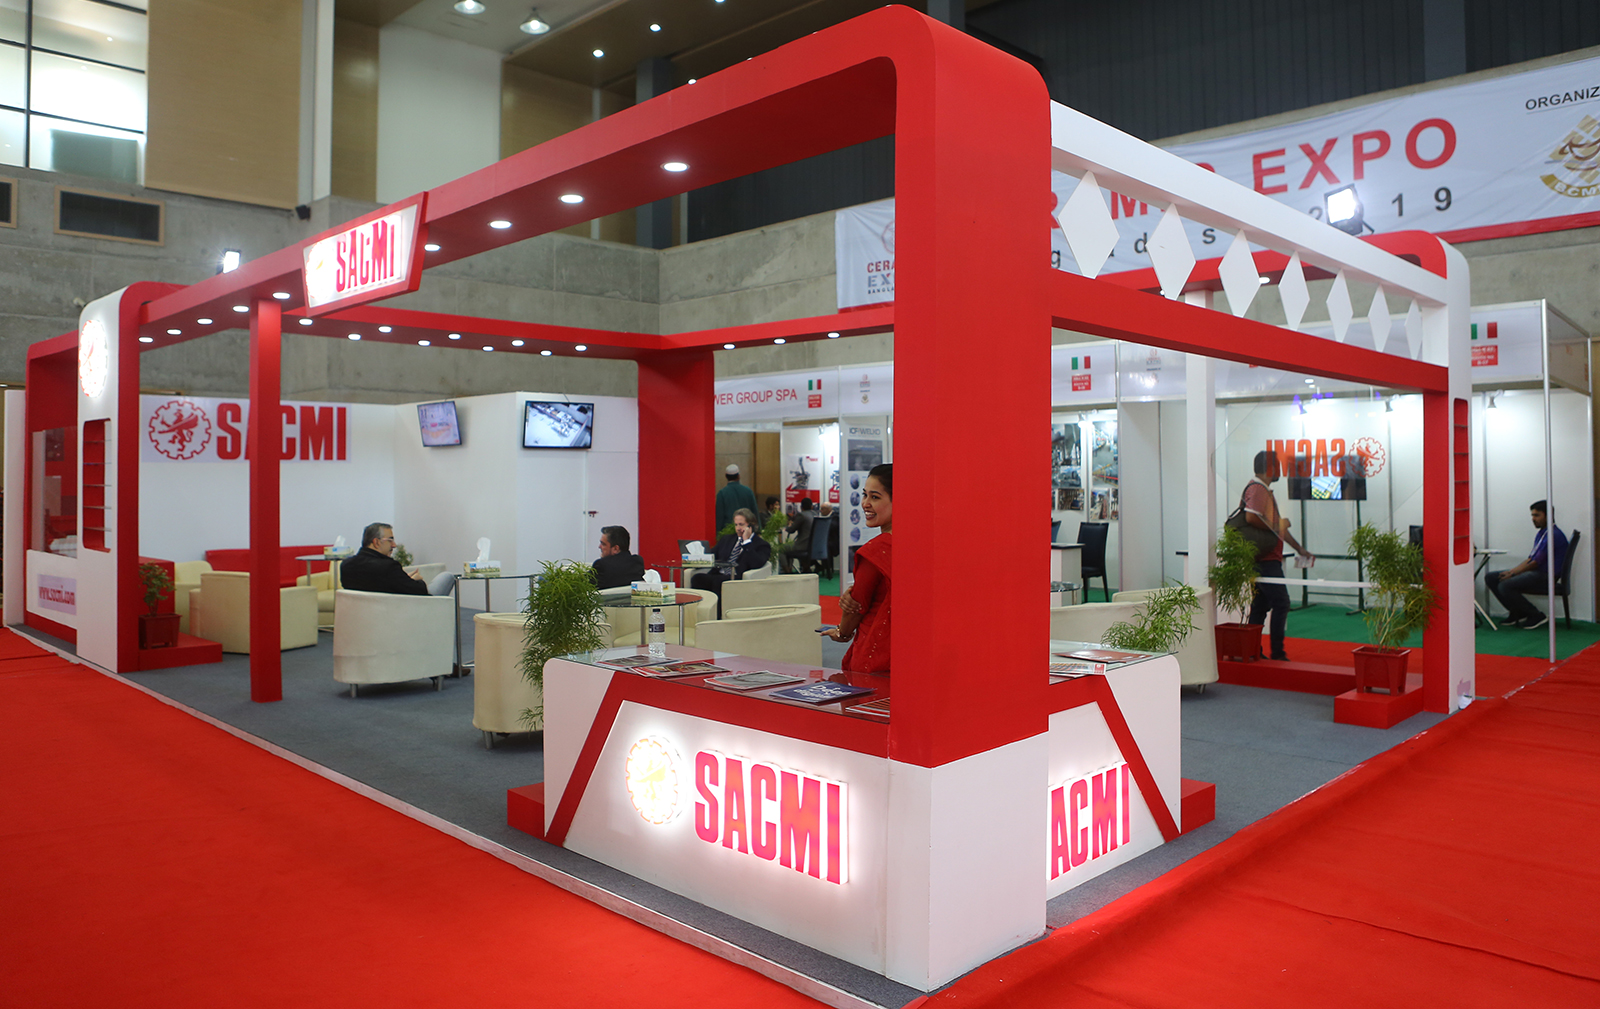 Ceramic Expo Bangladesh doubles its capacity, with SACMI playing a leading role